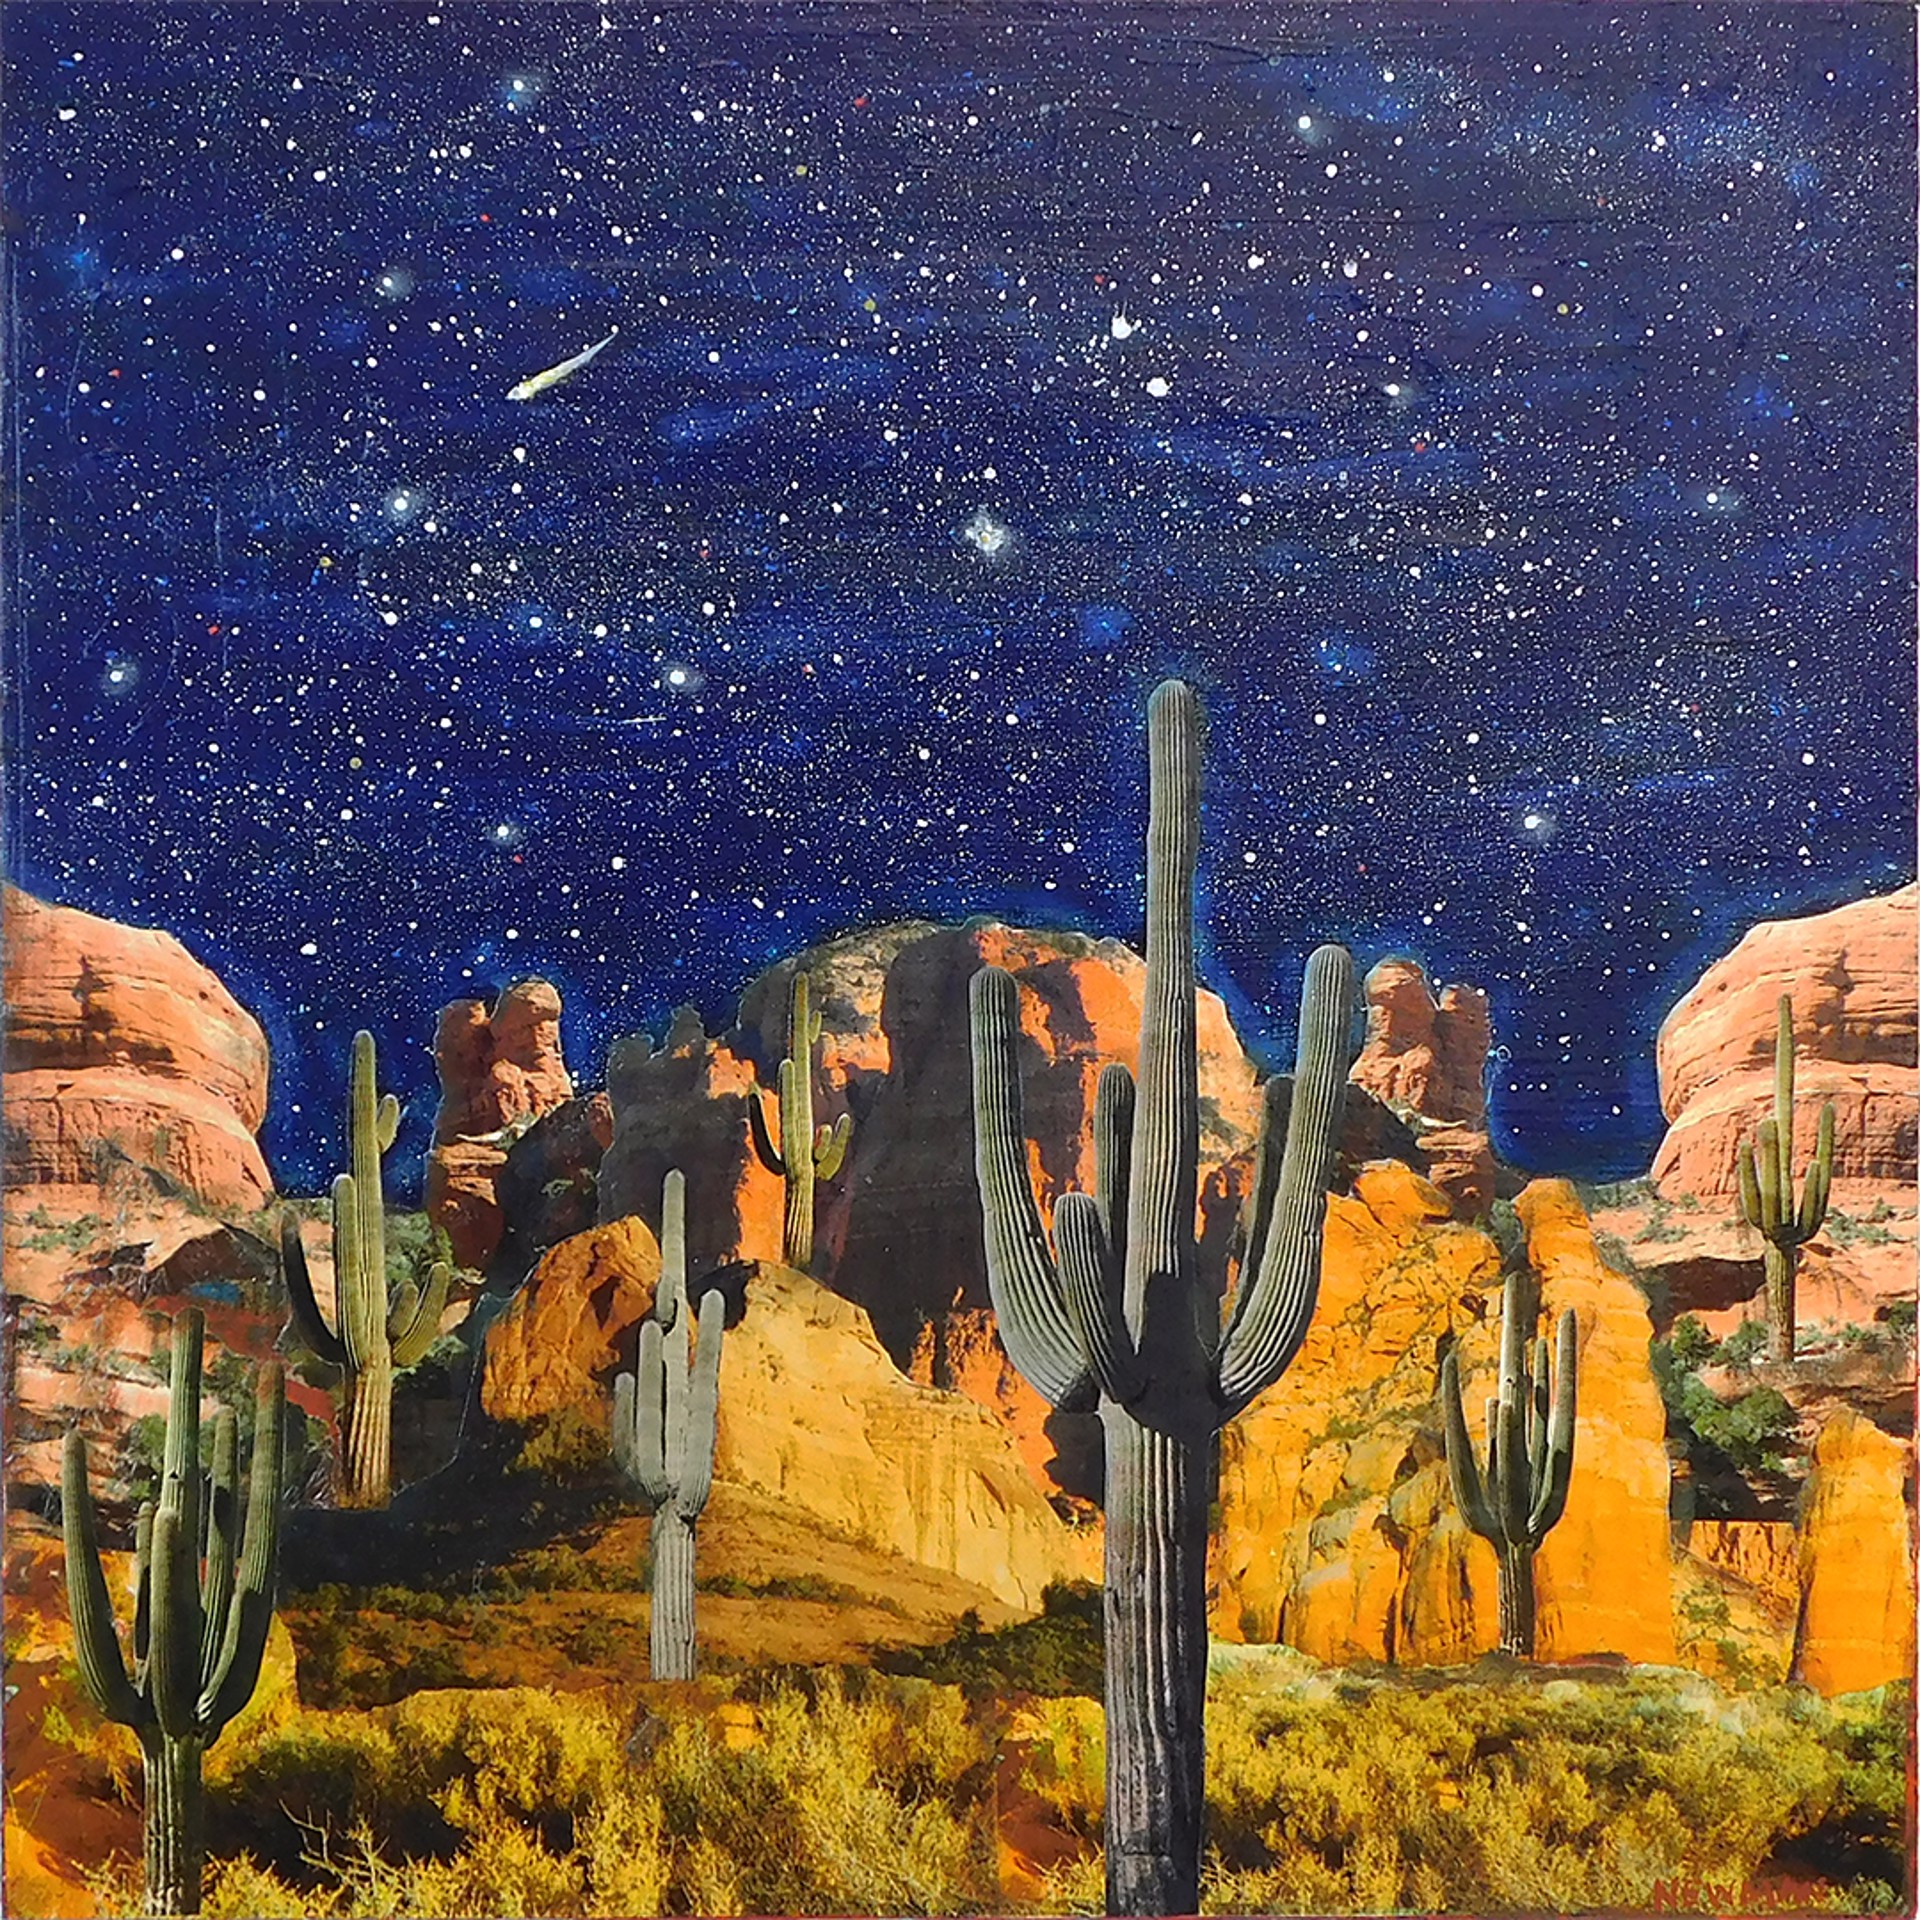 Saguaros & Night Sky by Dave Newman